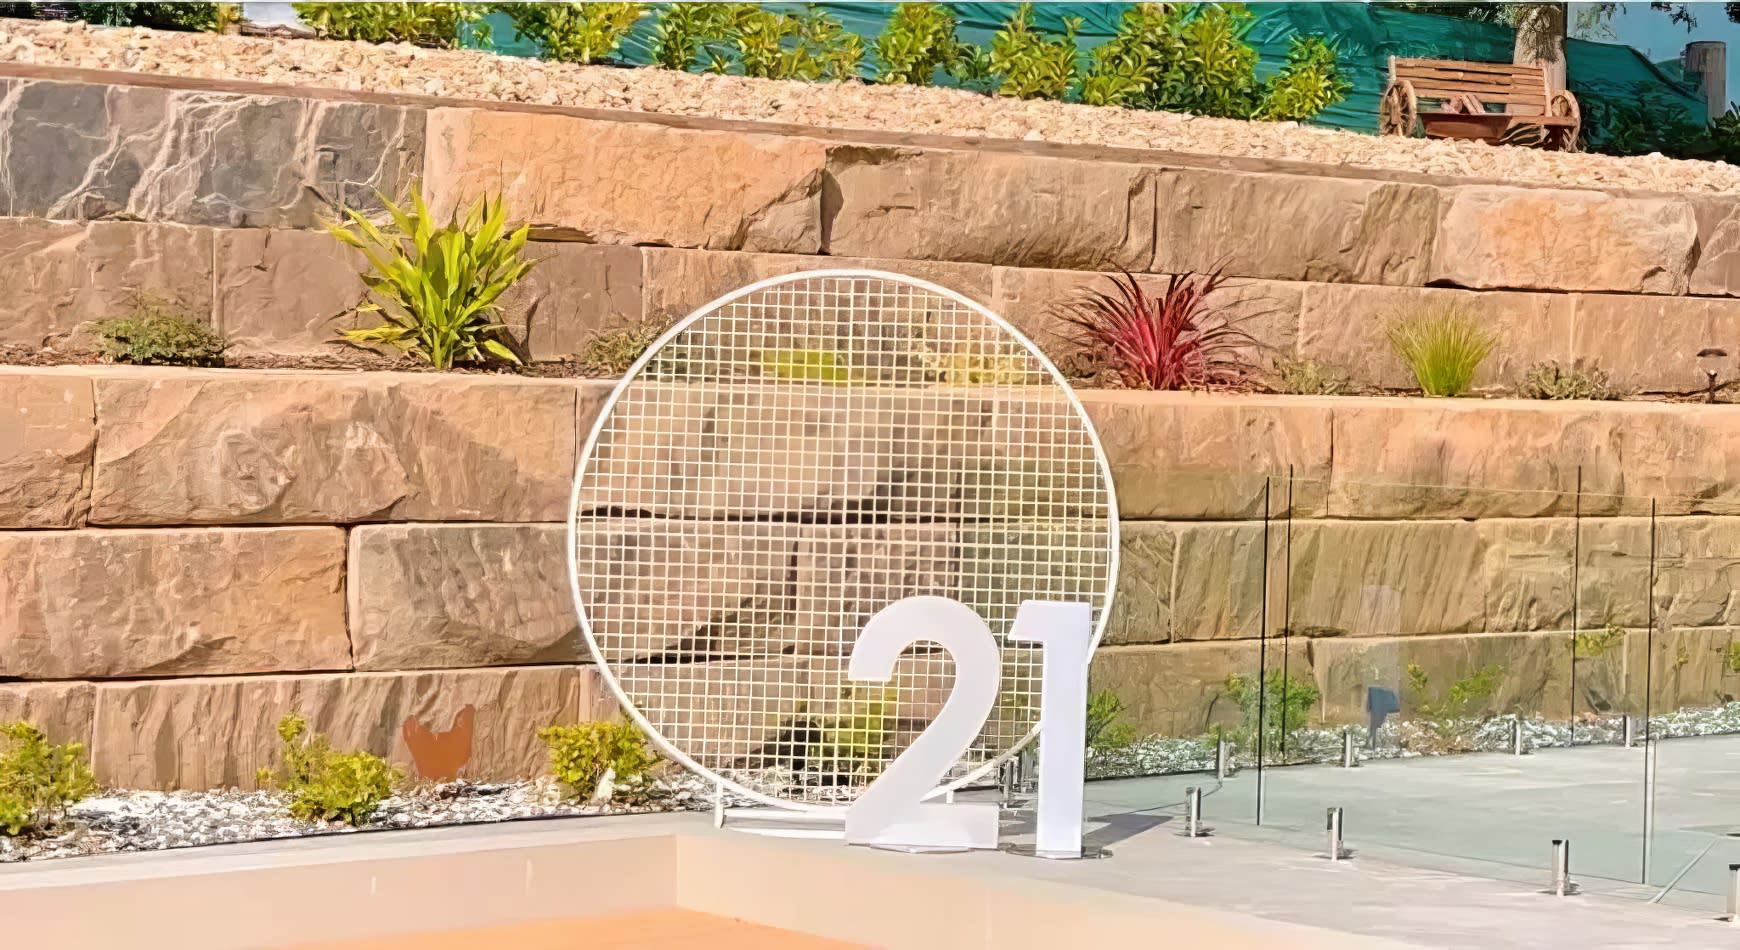 A circular white mesh backdrop is set up in front of a swimming pool.